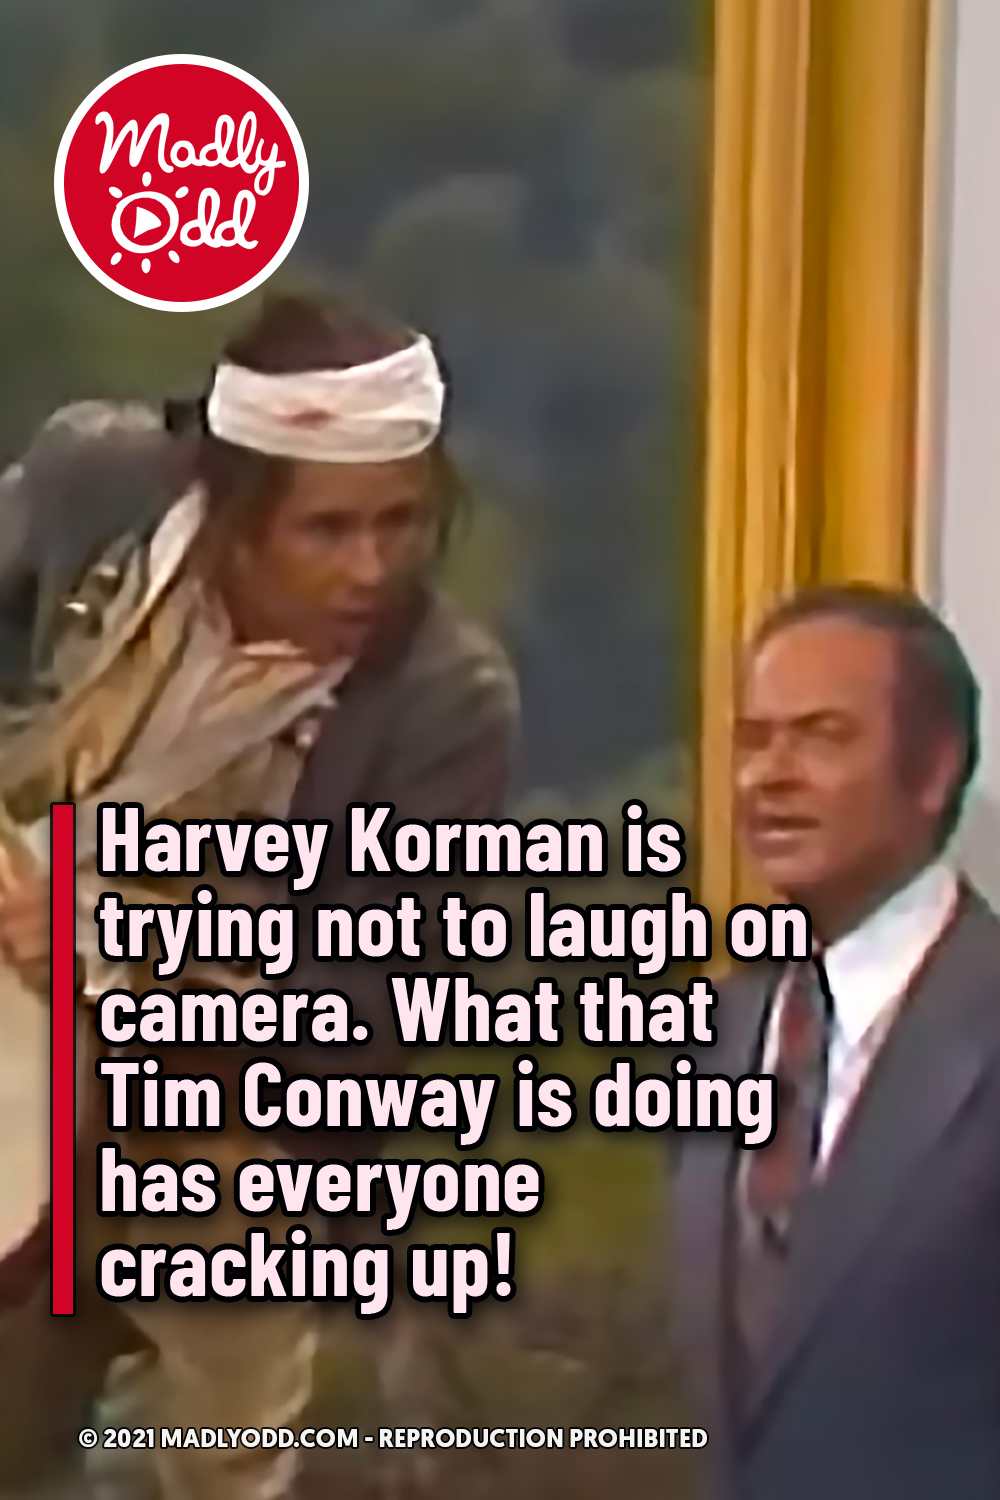 Harvey Korman is trying not to laugh on camera. What that Tim Conway is doing has everyone cracking up!